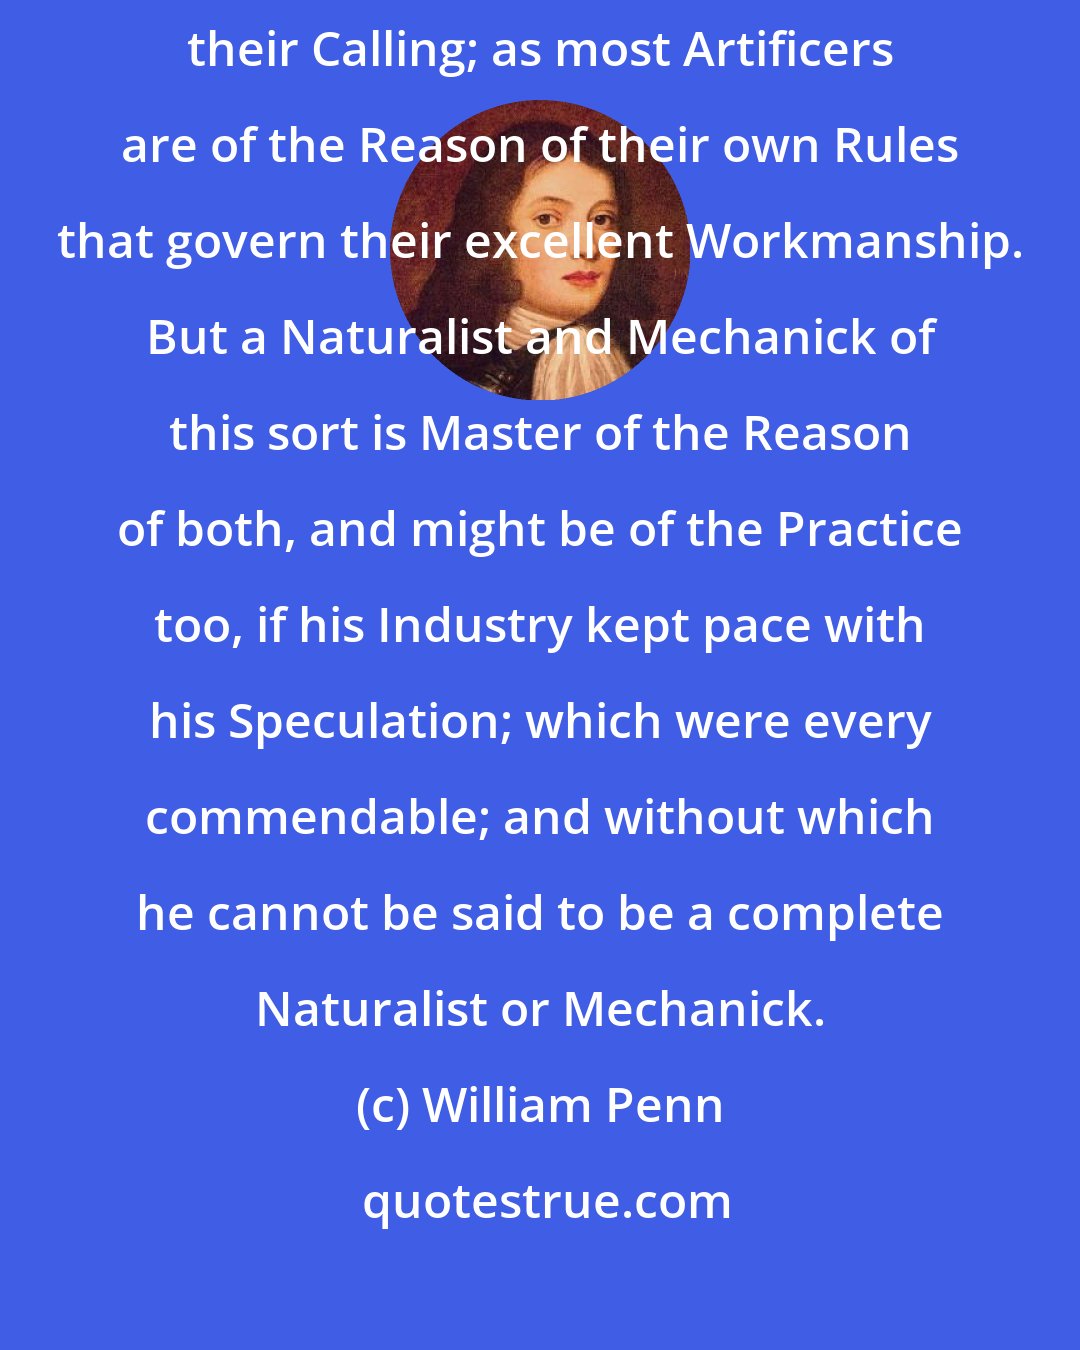 William Penn: Many able Gardeners and Husbandmen are yet Ignorant of the Reason of their Calling; as most Artificers are of the Reason of their own Rules that govern their excellent Workmanship. But a Naturalist and Mechanick of this sort is Master of the Reason of both, and might be of the Practice too, if his Industry kept pace with his Speculation; which were every commendable; and without which he cannot be said to be a complete Naturalist or Mechanick.